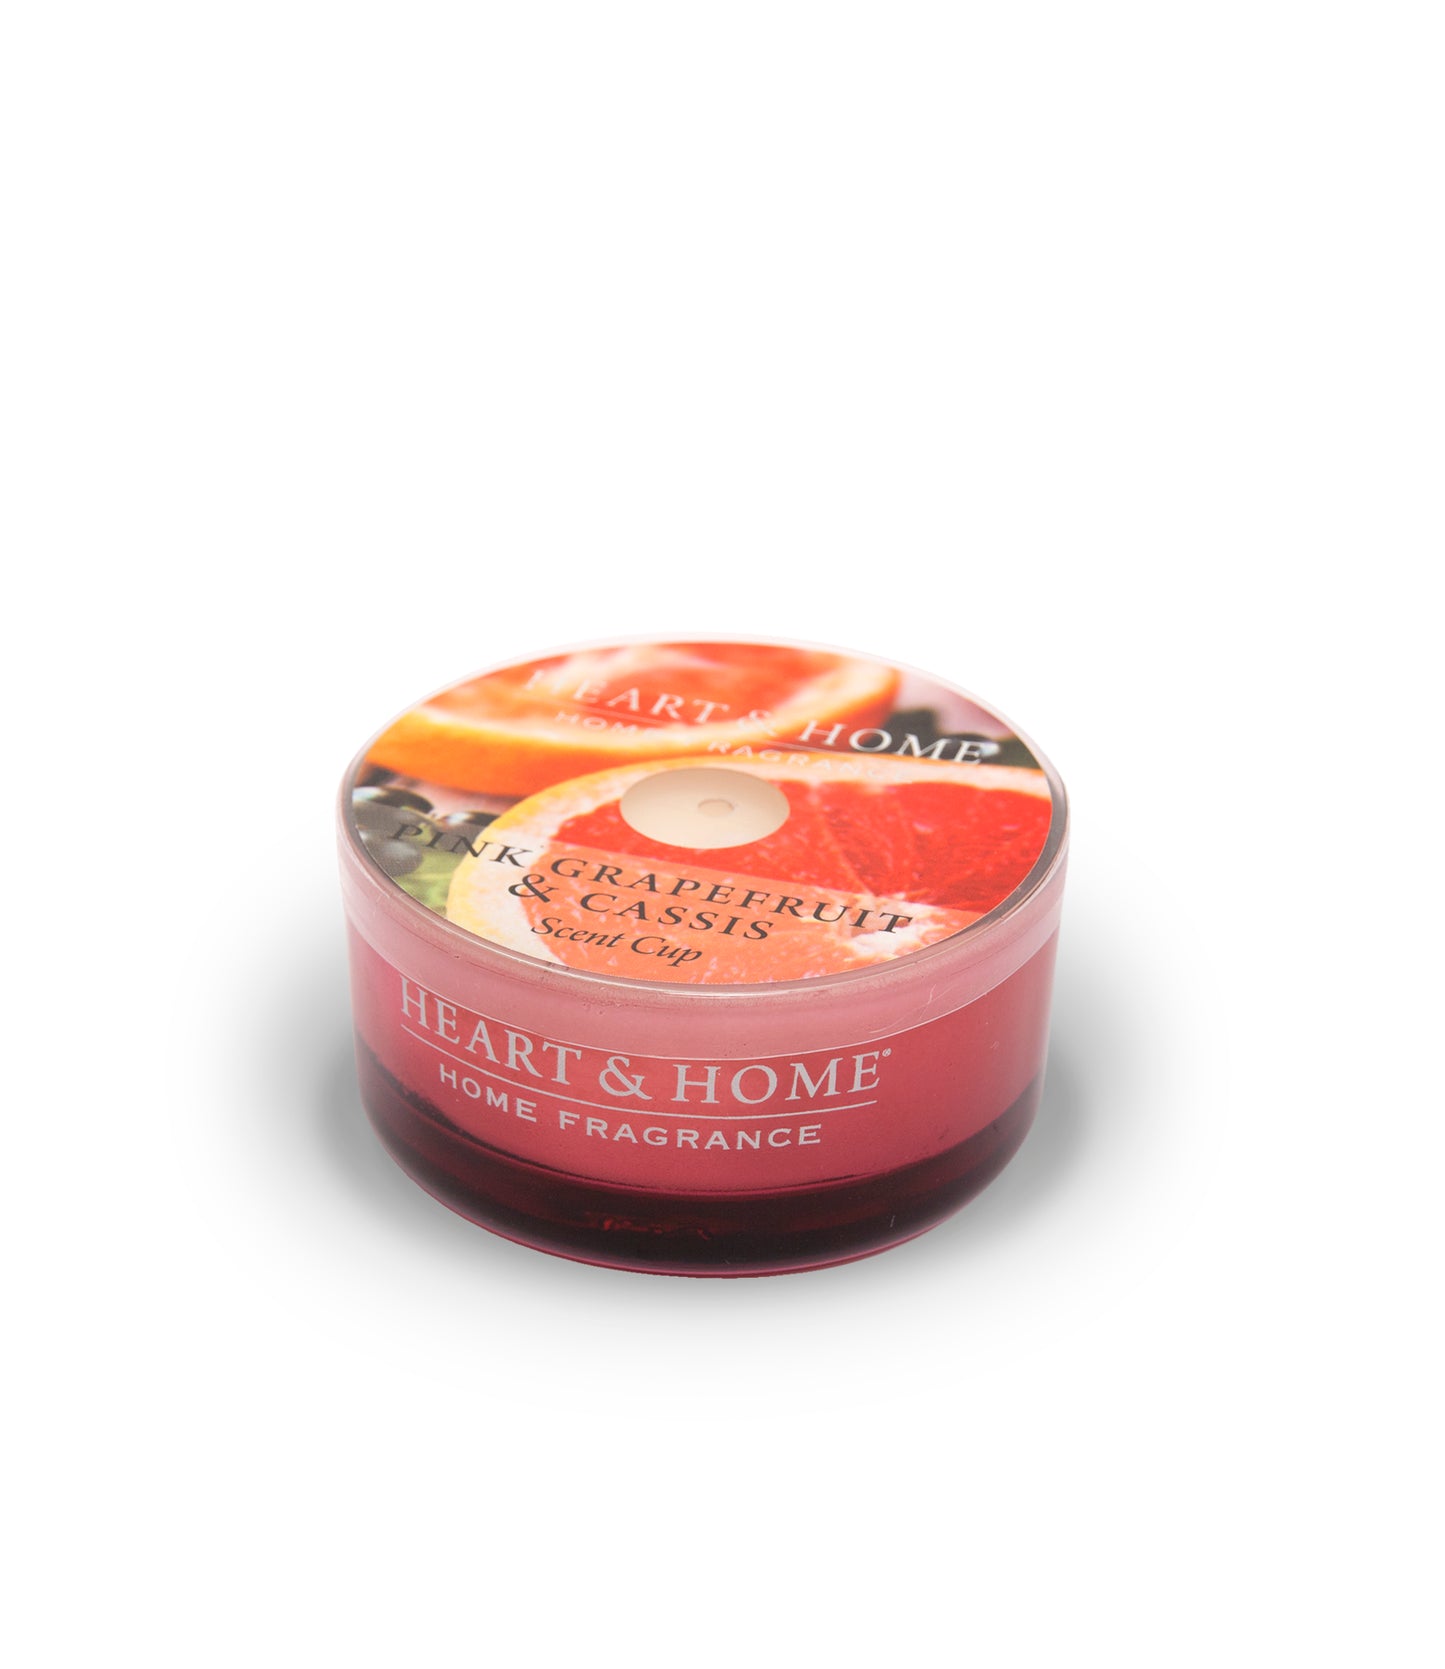 Heart & Home Pink Grapefruit & Cassis Scented Soy Wax Scent Cup